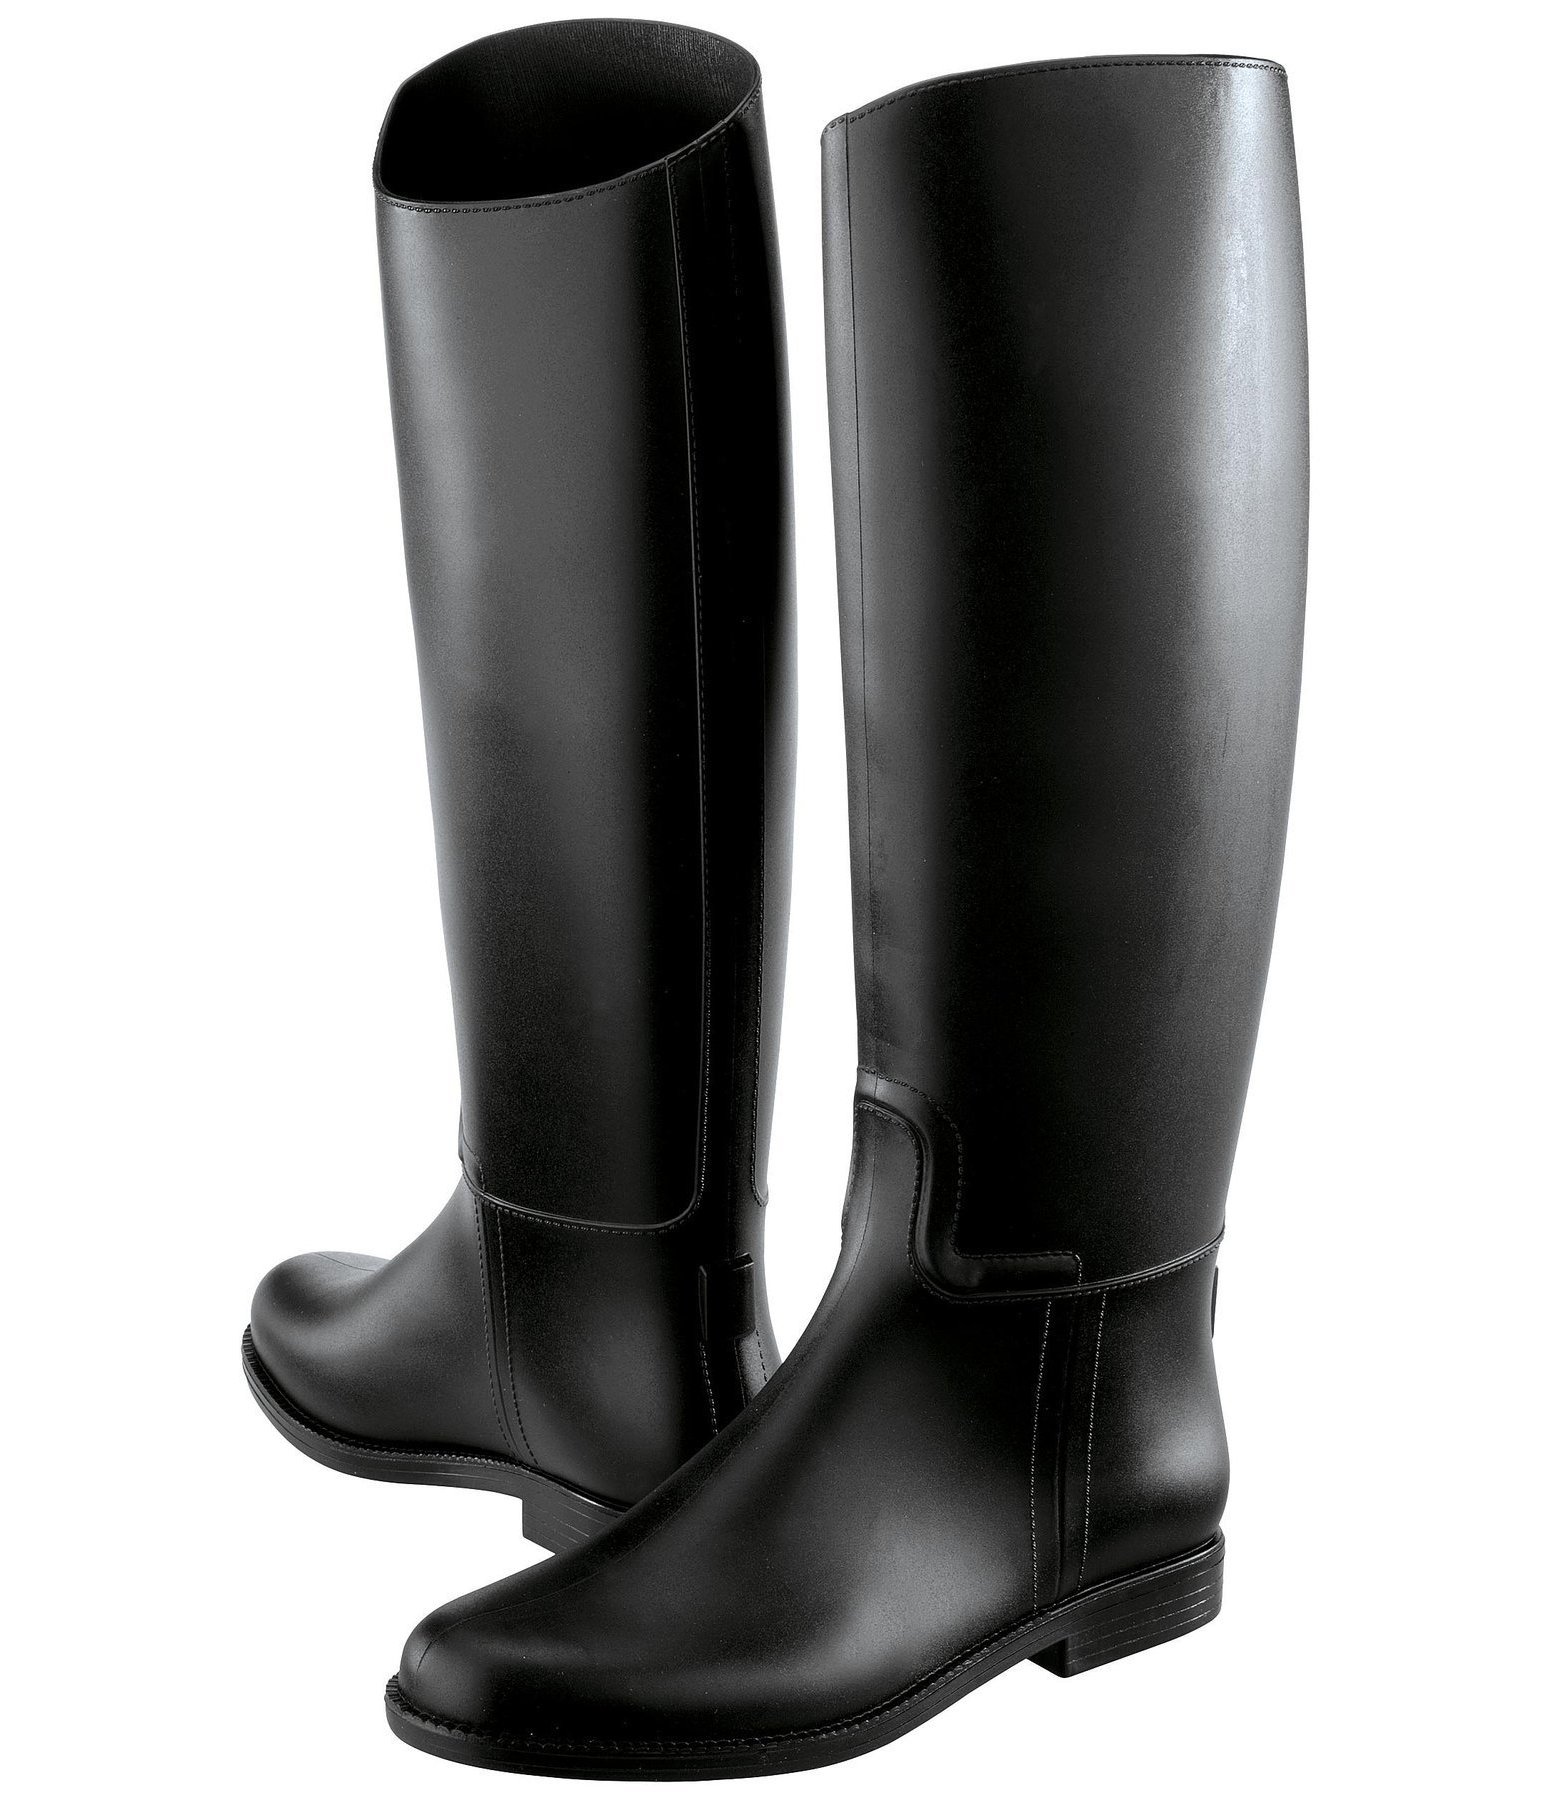 Rubber Riding Boots For Men